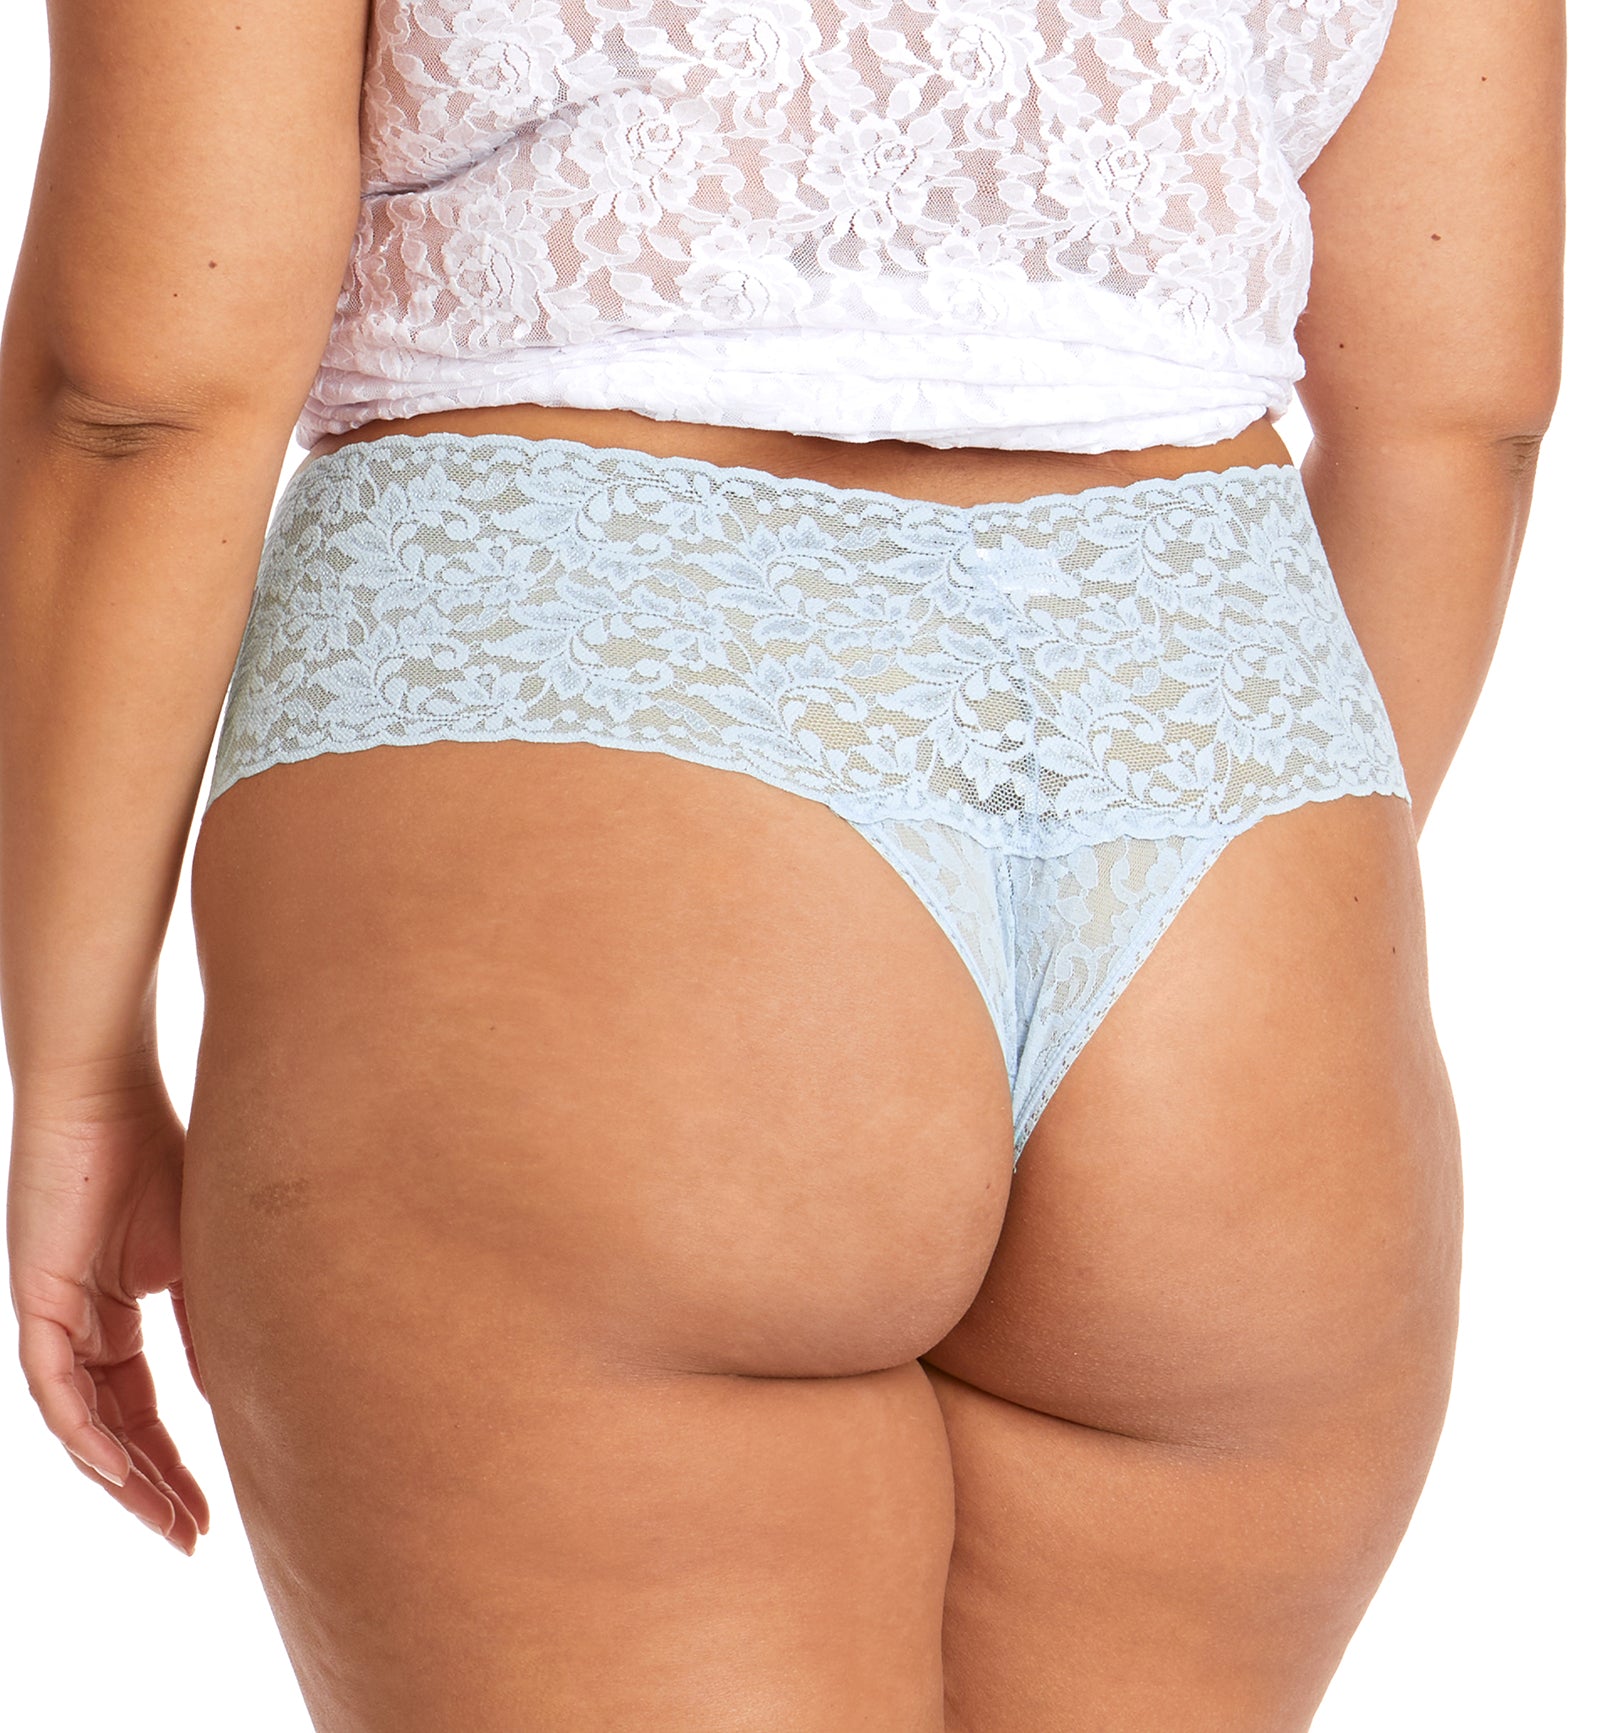 Hanky Panky Signature Lace PLUS Retro Thong (9K1926X),Partly Cloudy - Partly Cloudy,One Size